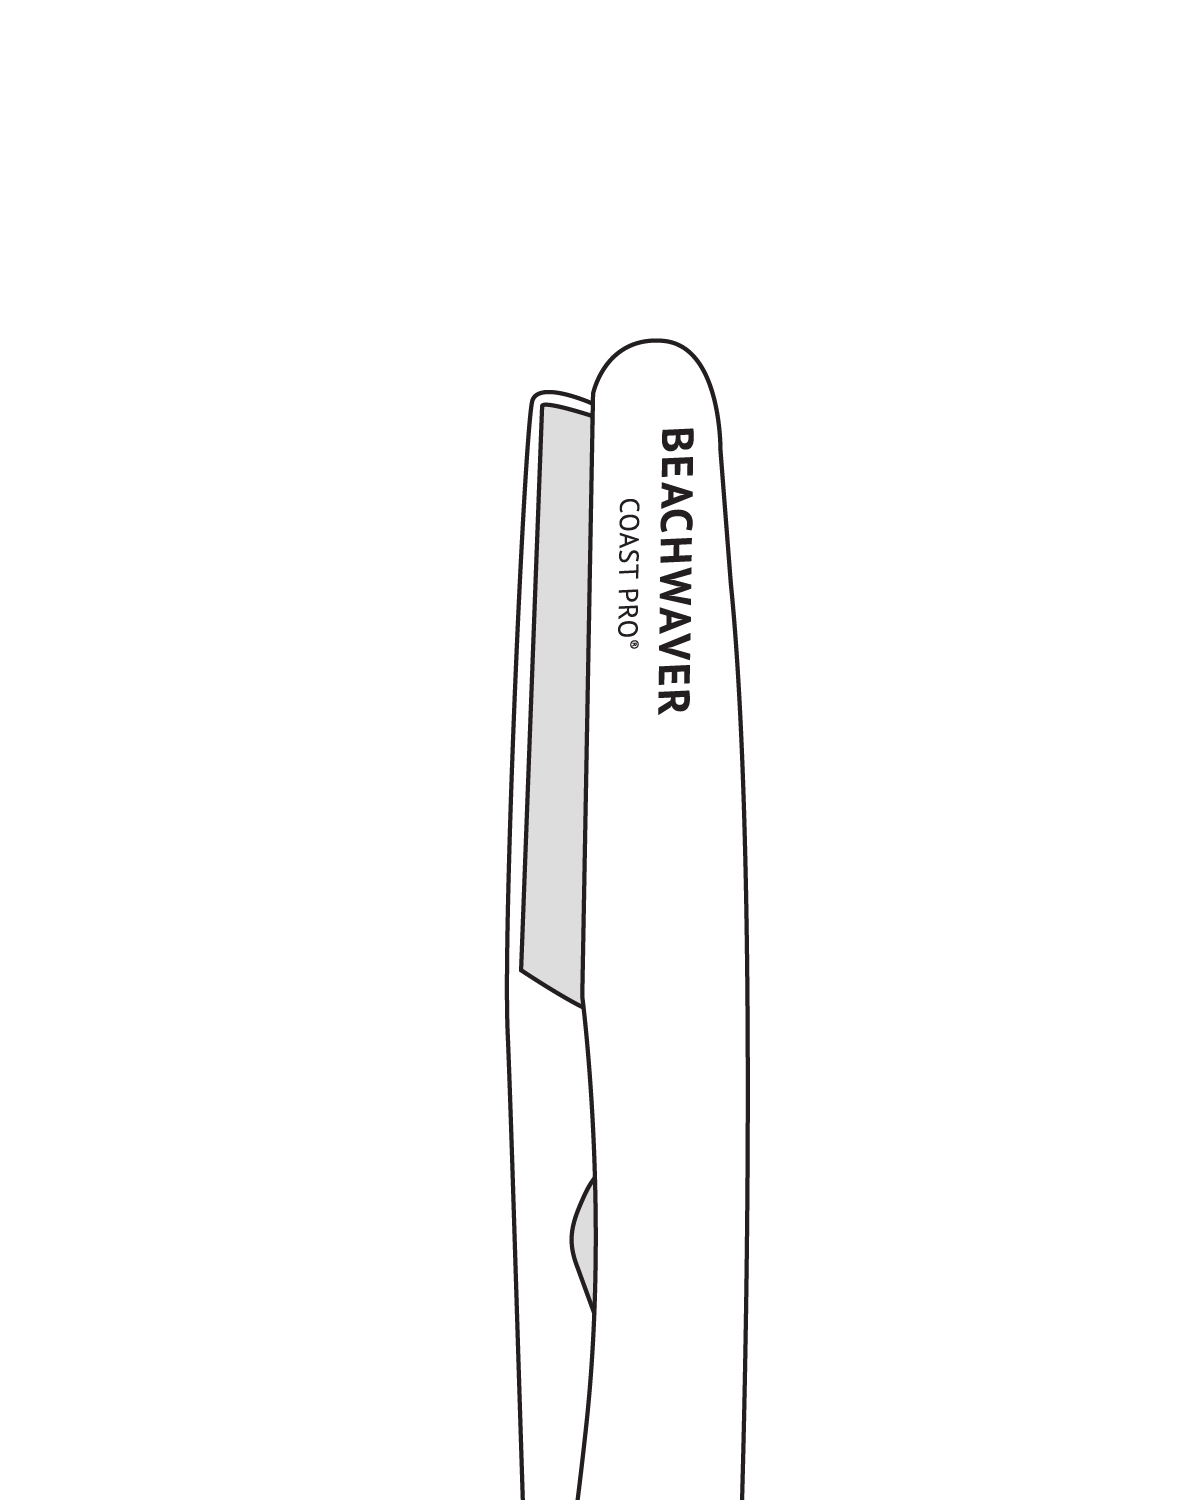 Black and grey vector drawing of the Beachwaver Coast Pro iron.